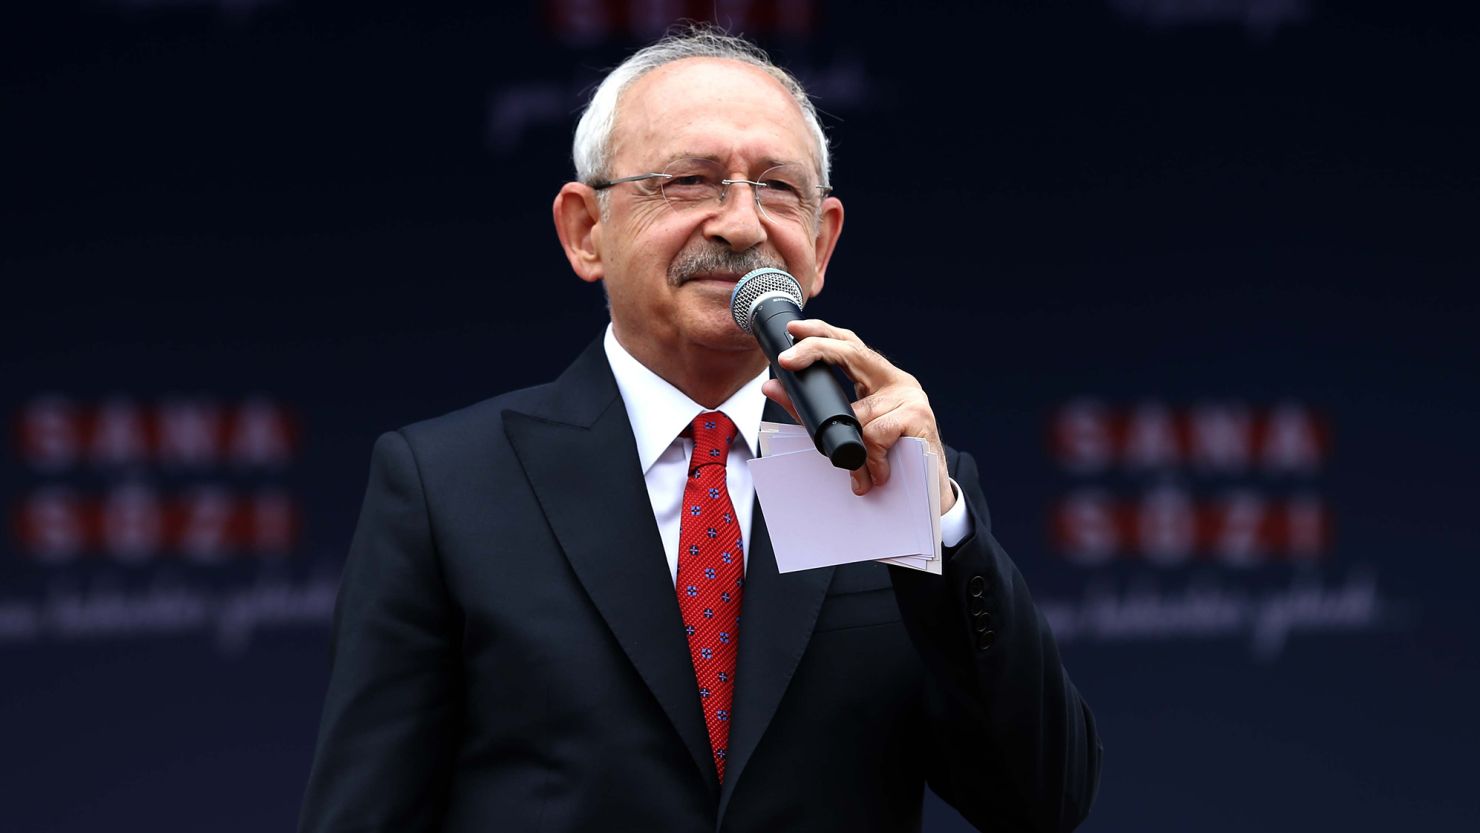 Kemal Kilicdaroglu, the joint presidential candidate of the Nation Alliance greets the crowd at an electoral rally in Sivas, Turkey on May 11.